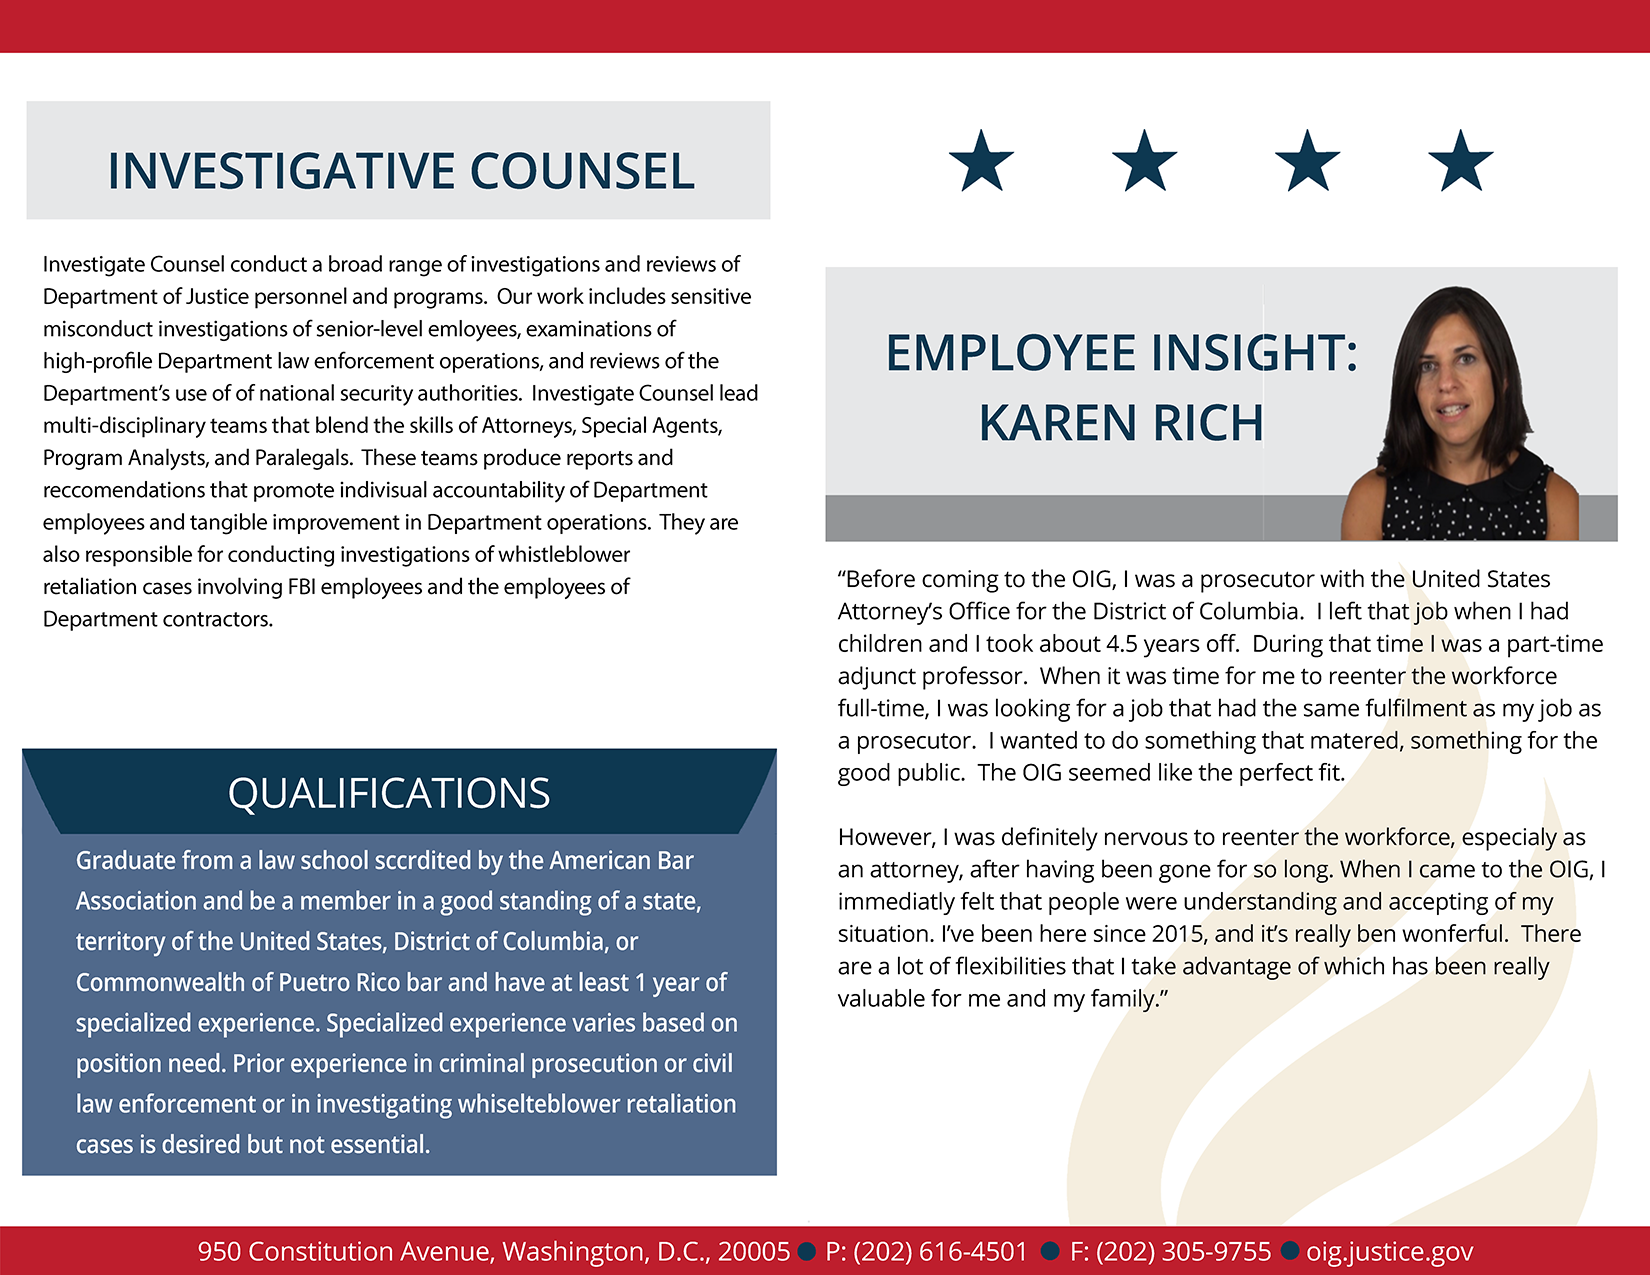 Learn more about the Investigative Counsel's employee experience